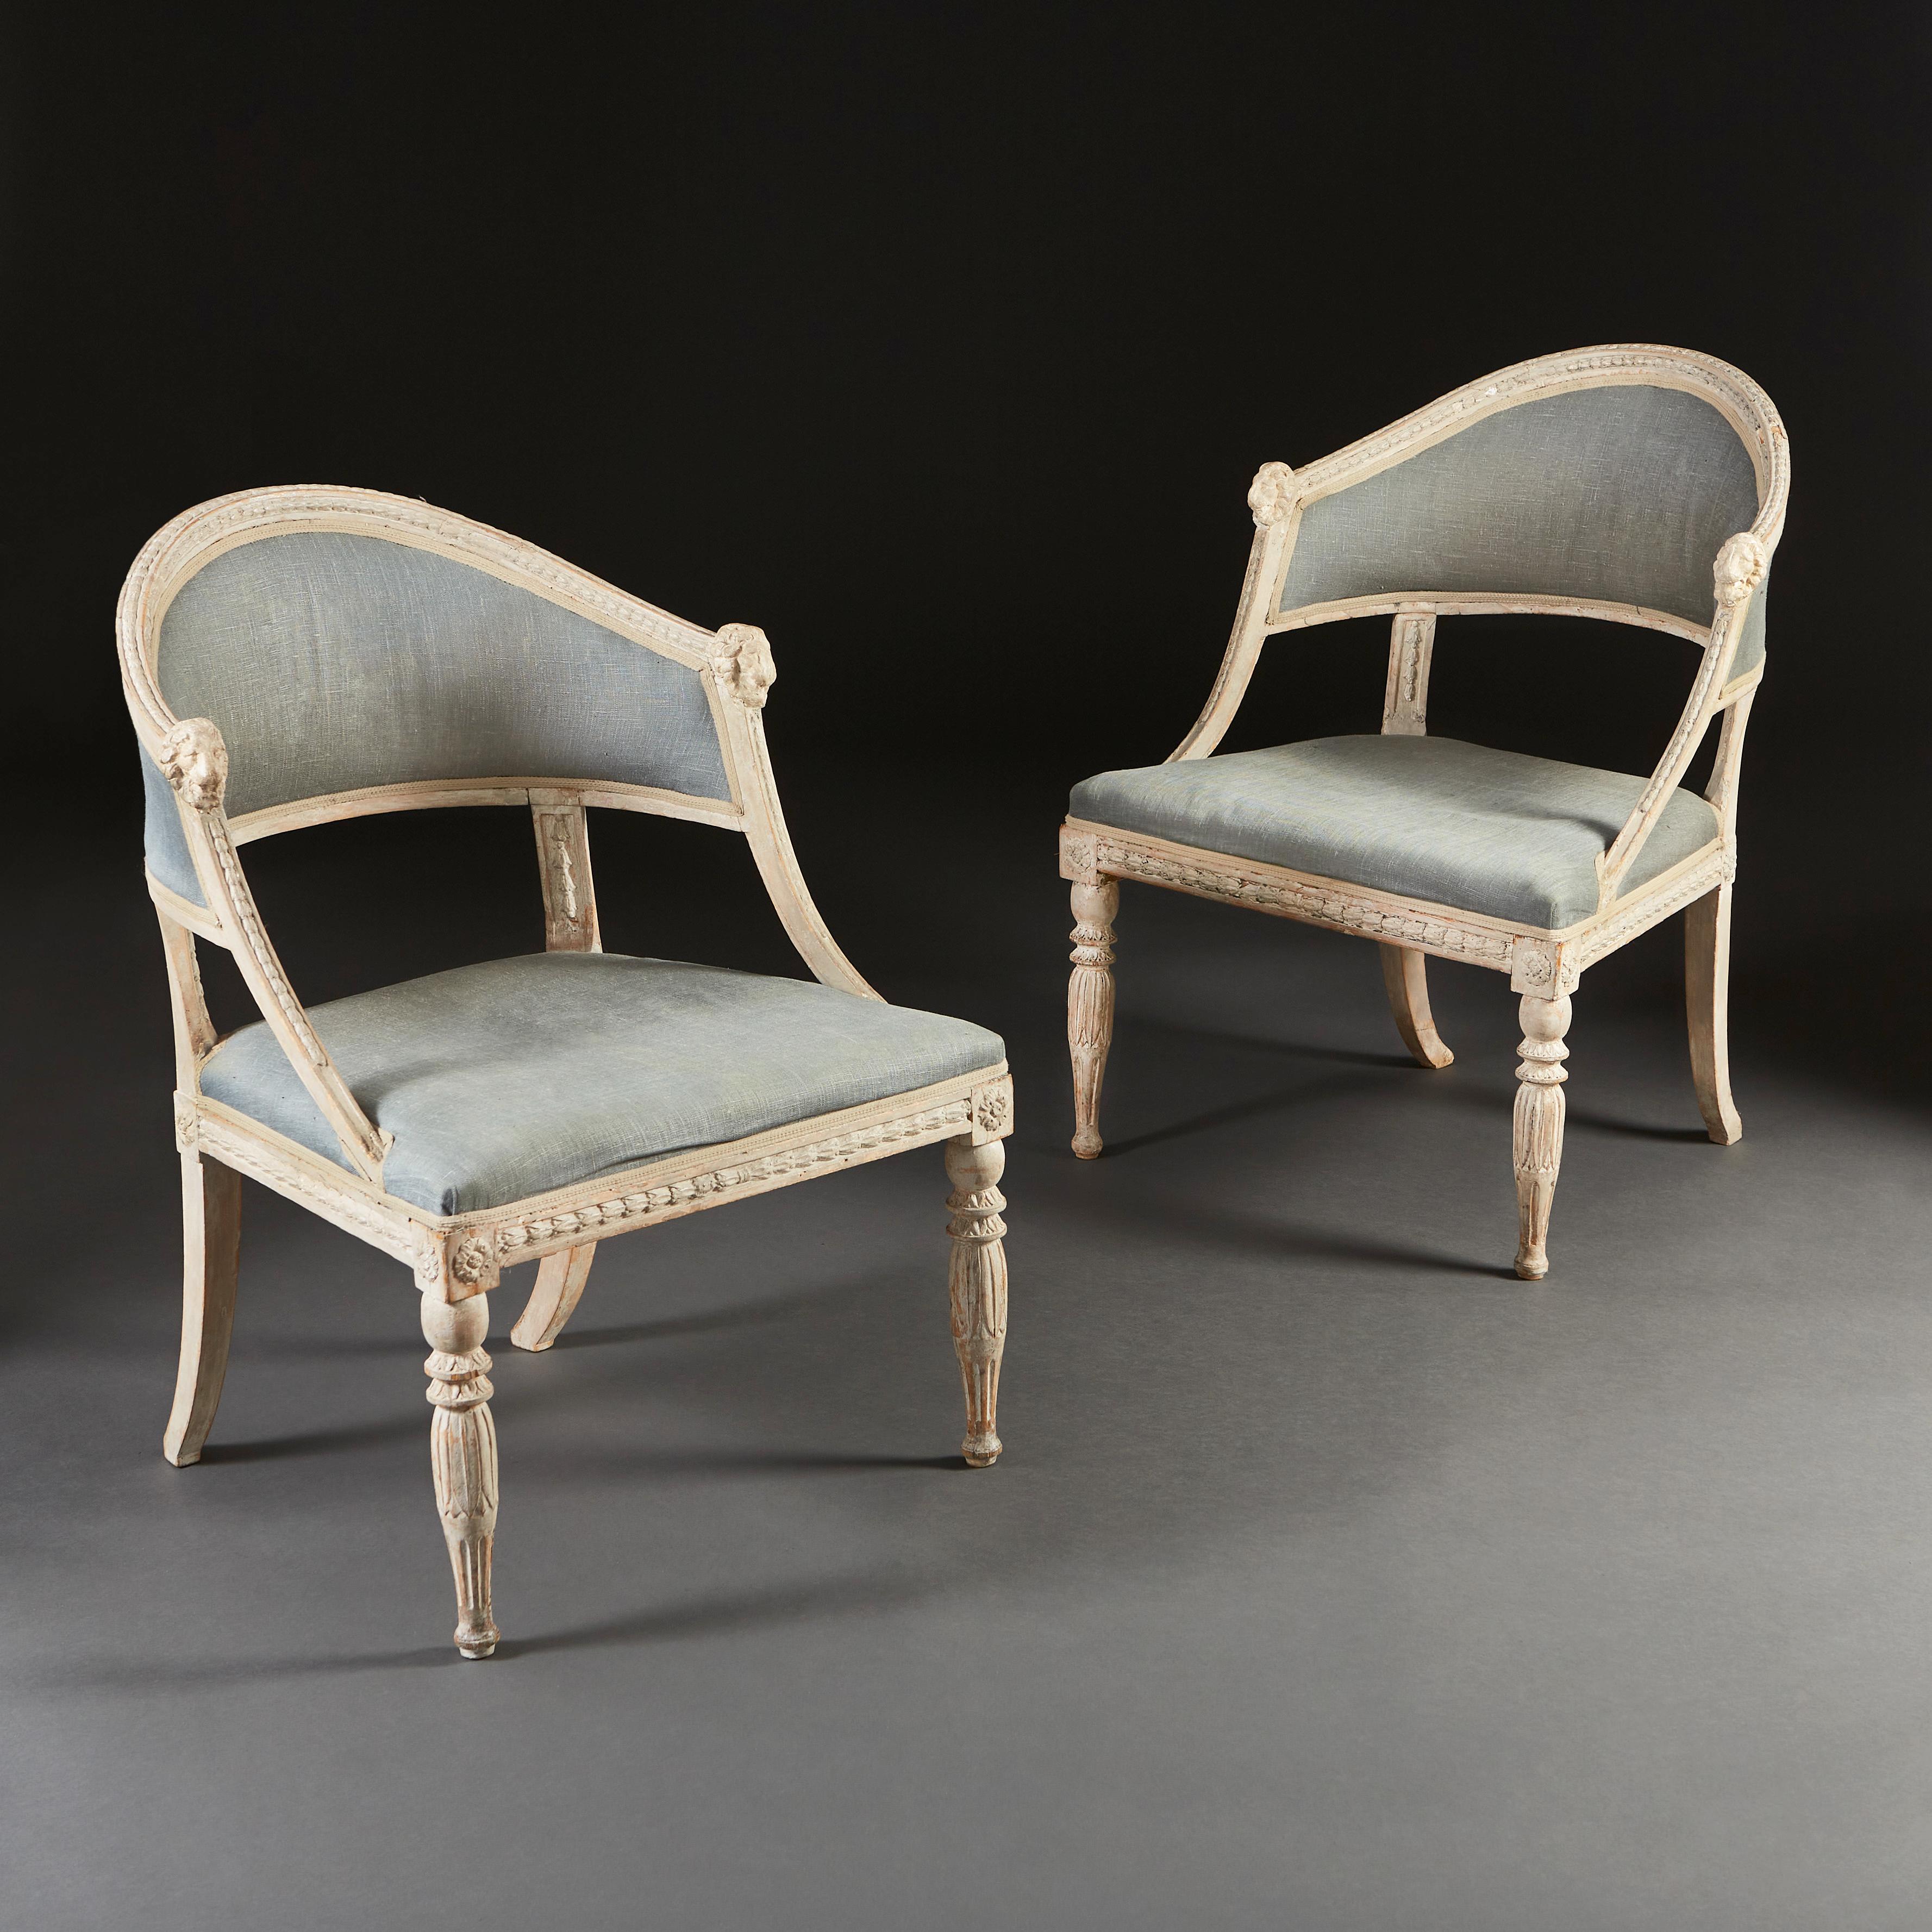 A pair of early nineteenth century Gustavian Swedish armchairs with carved and painted frames, with curved backs carved with laurel leaves and terminating with masks to the arms, upholstered in blue linen.